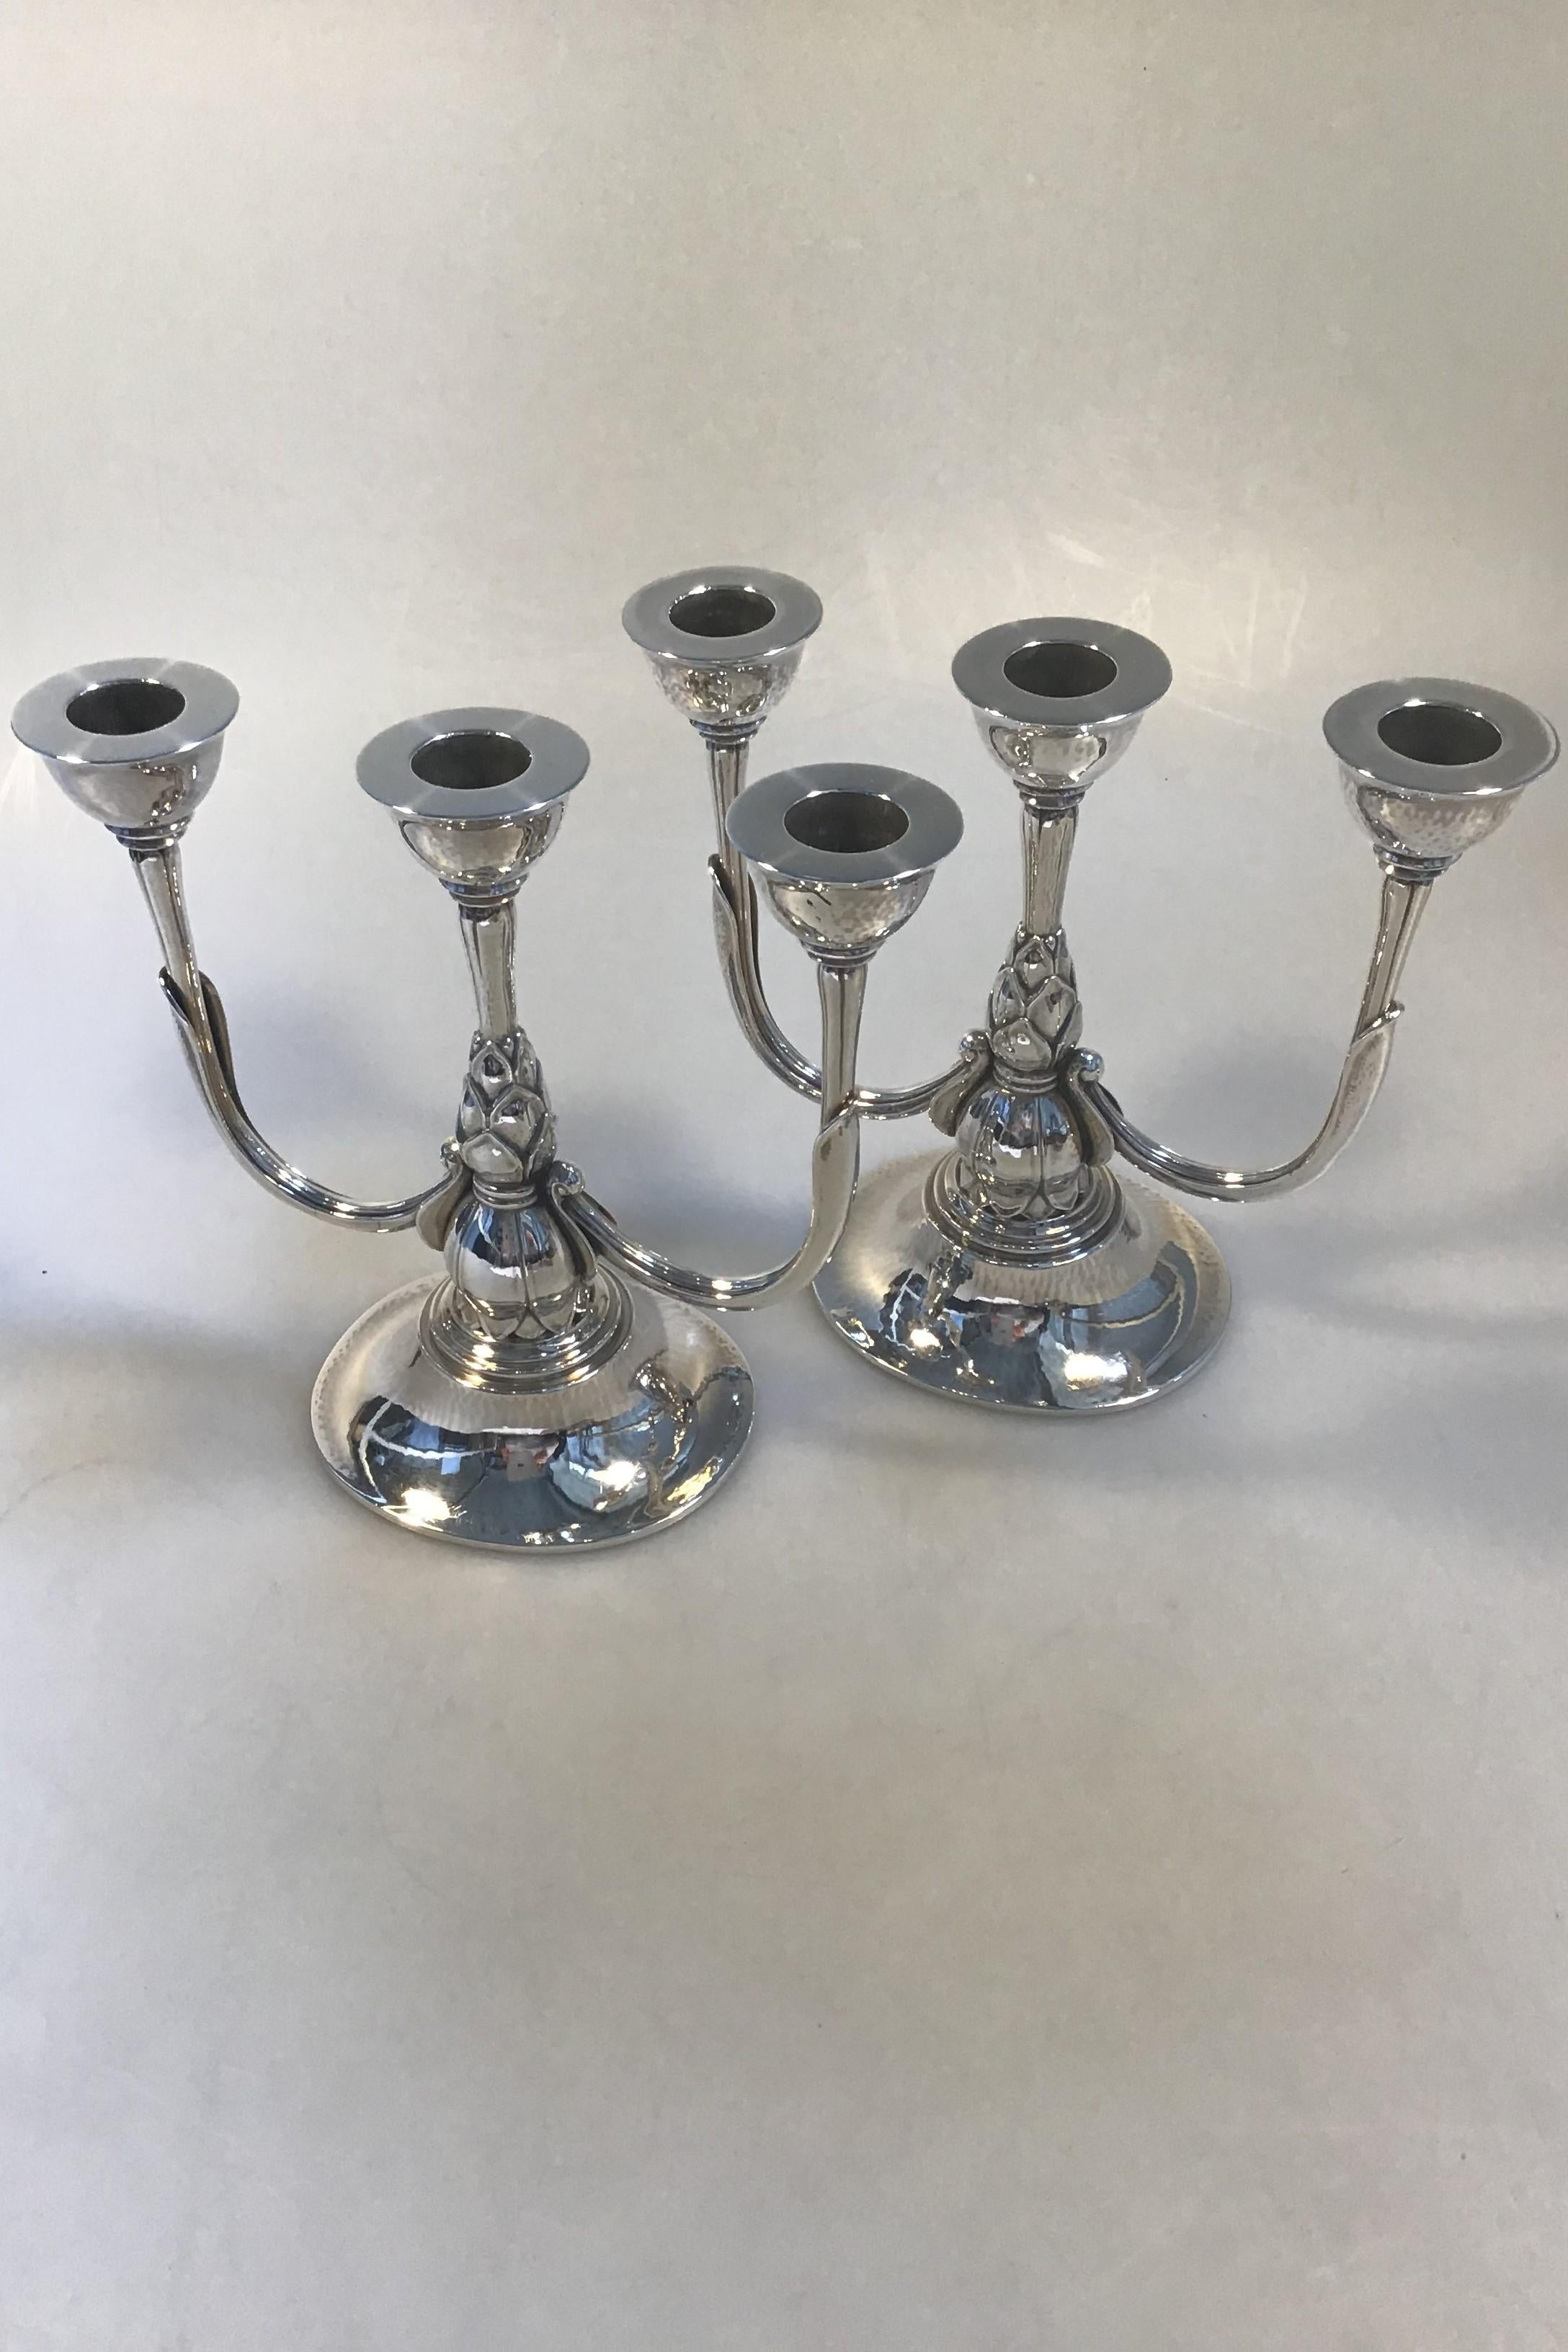 Georg Jensen sterling silver pair of three-branch candelabra No 537B(2)
(1925-1933) design Harald Nielsen 

Measures: H 18 cm (7.08 in), W 20 cm(7.87 in) 
Combined weight 1185gr (41.80 oz).